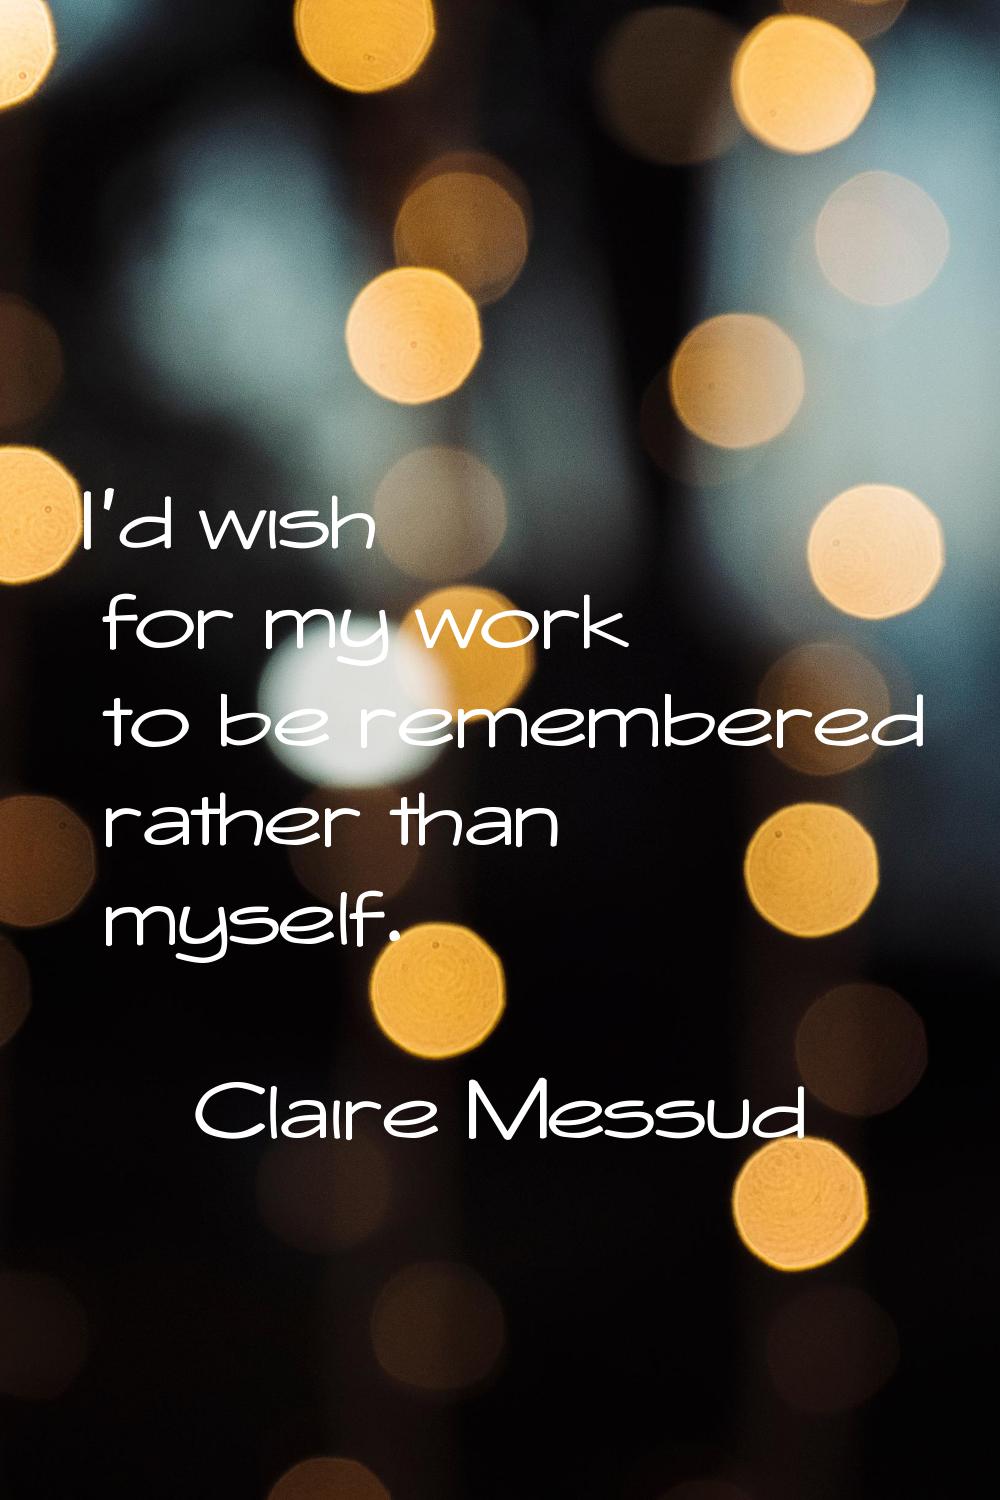 I'd wish for my work to be remembered rather than myself.